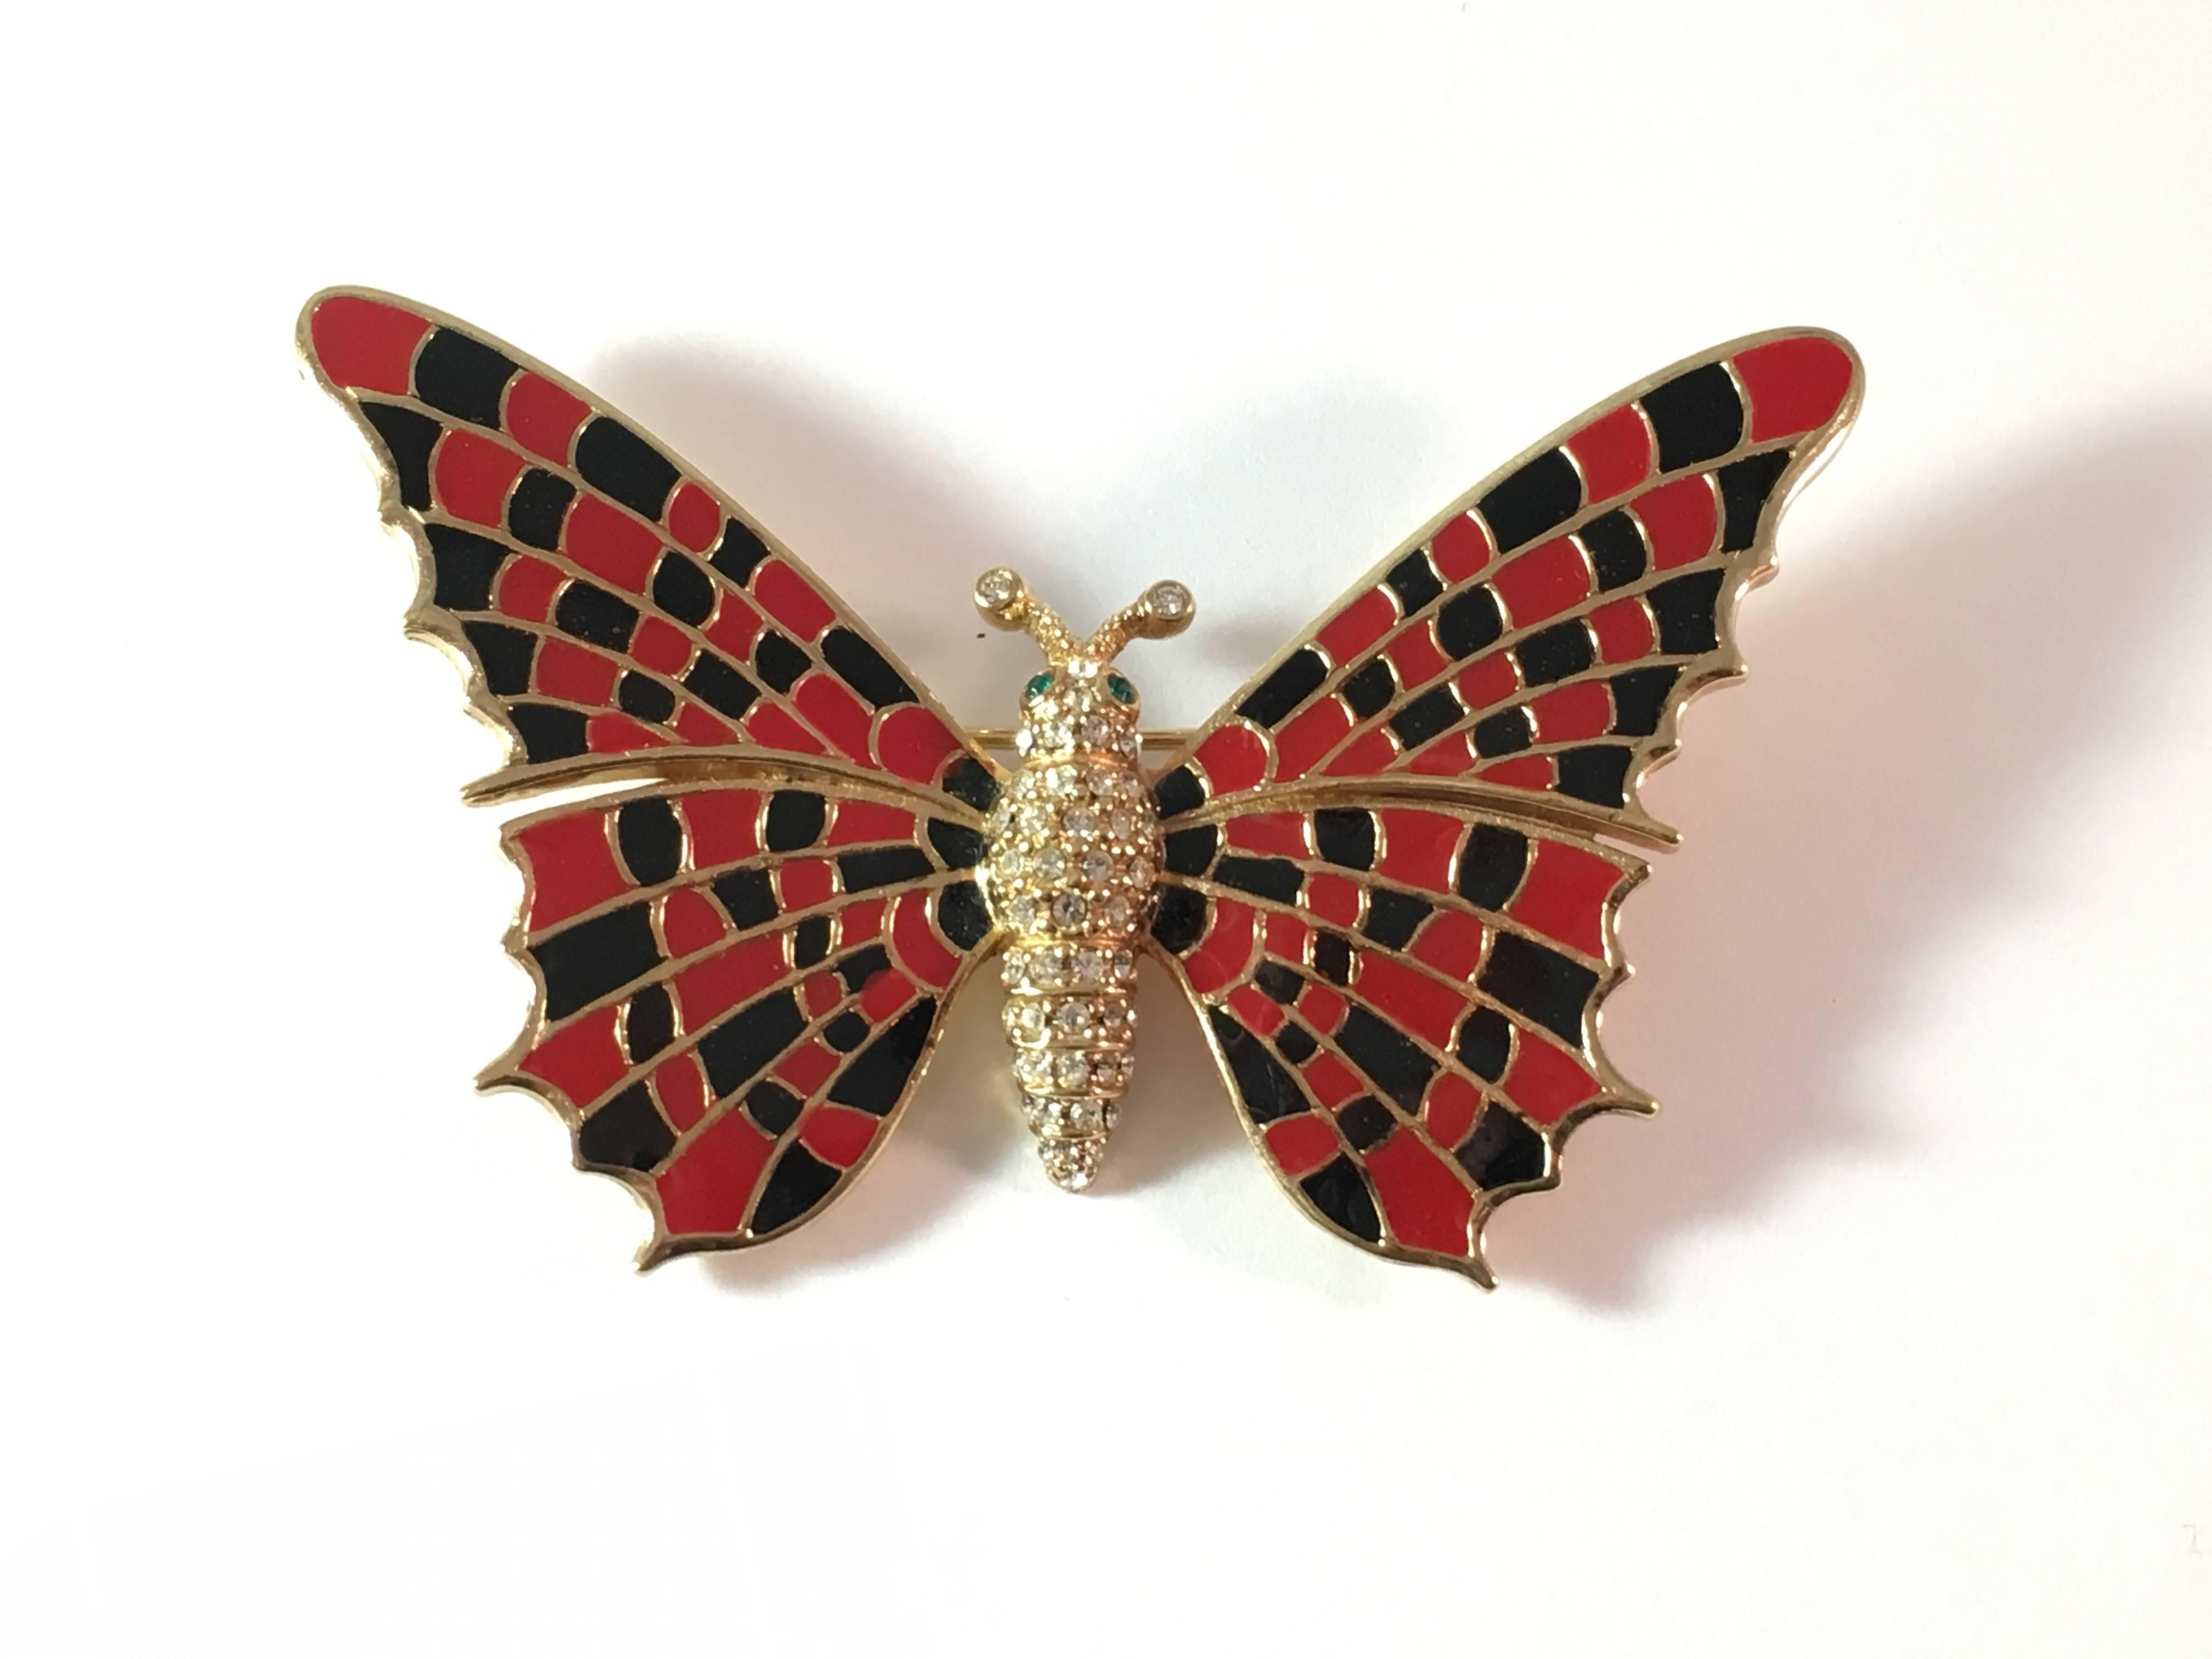 This is a stunning butterfly brooch from Ciner. Its wings are made up of red and black enamel. The butterfly's body is made up of clear pave rhinestones with green rhinestone eyes. The back of the brooch is marked 'Ciner' and it measures 2 3/4"